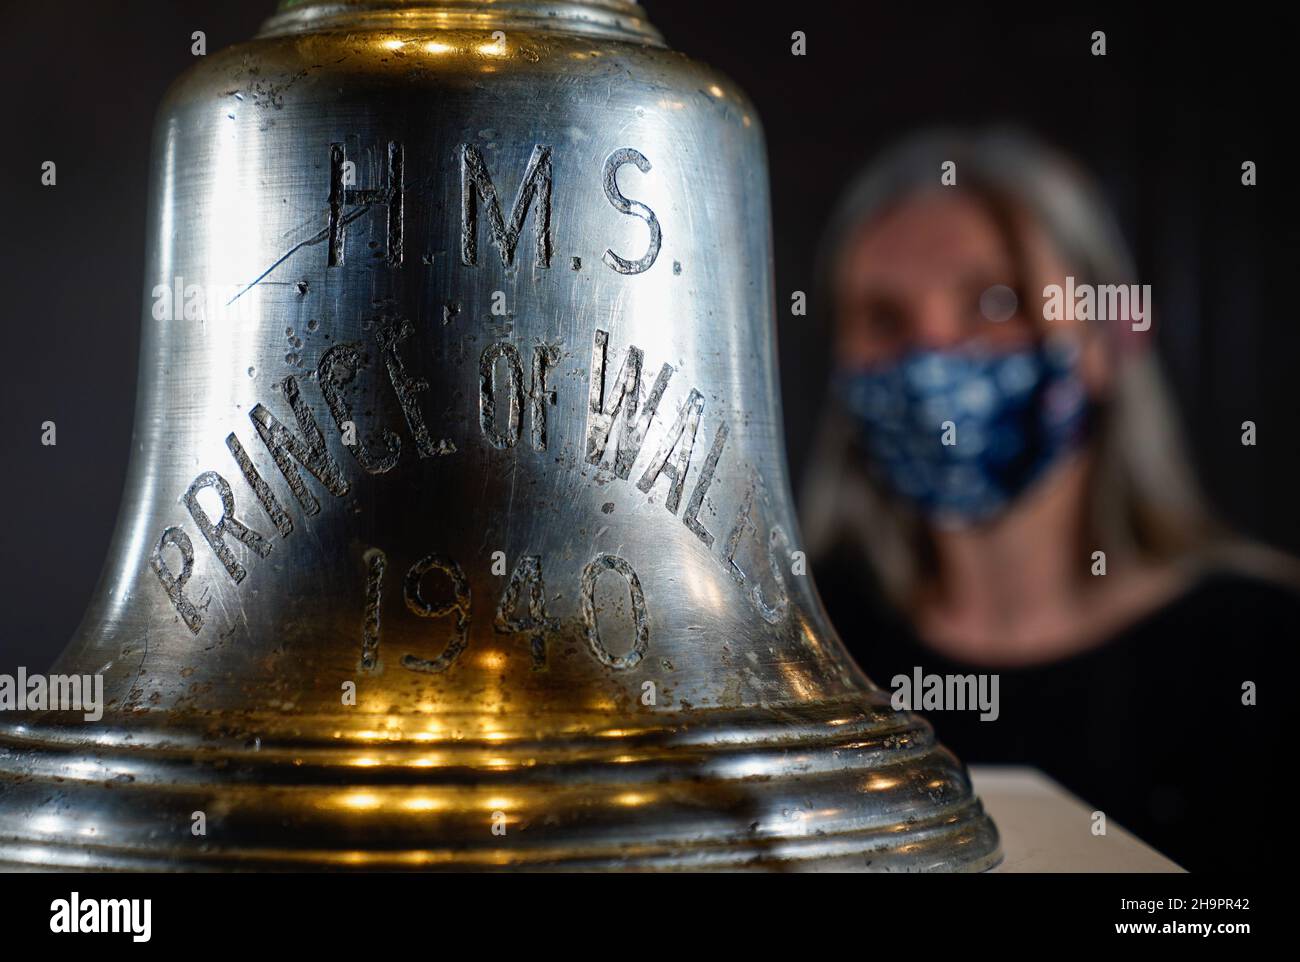 Victoria Ingles, senior curator at the National Museum of the Royal Navy, looks at the ship's bell from HMS Prince of Wales which was sunk along with HMS Repulse after a Japanese air attack on December 10 1941. 842 men lost their lives in what is one of the worst disasters in British naval history. Picture date: Wednesday December 8, 2021. Stock Photo